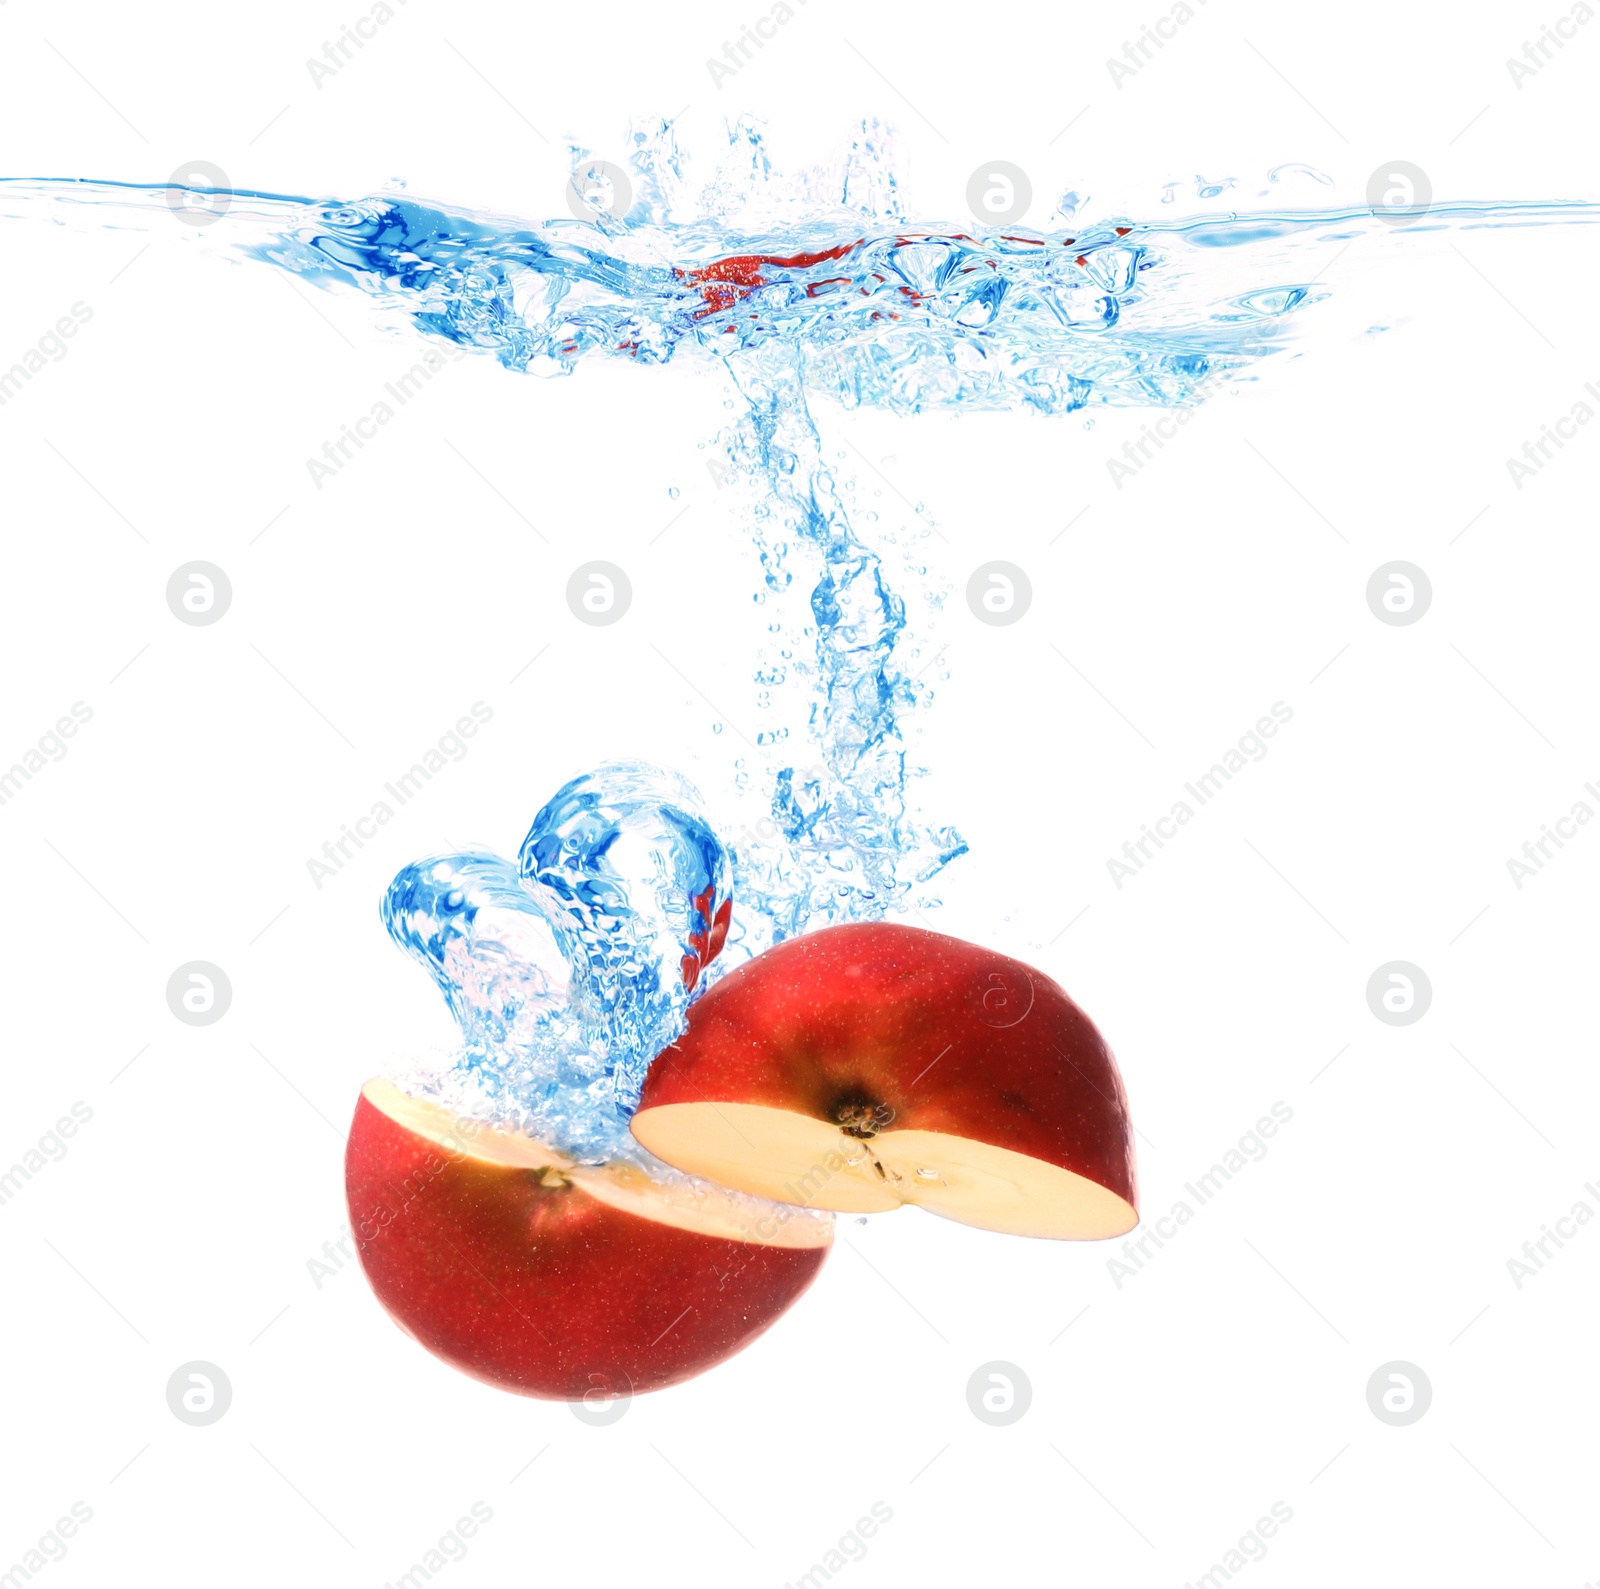 Photo of Cut apple falling down into clear water against white background